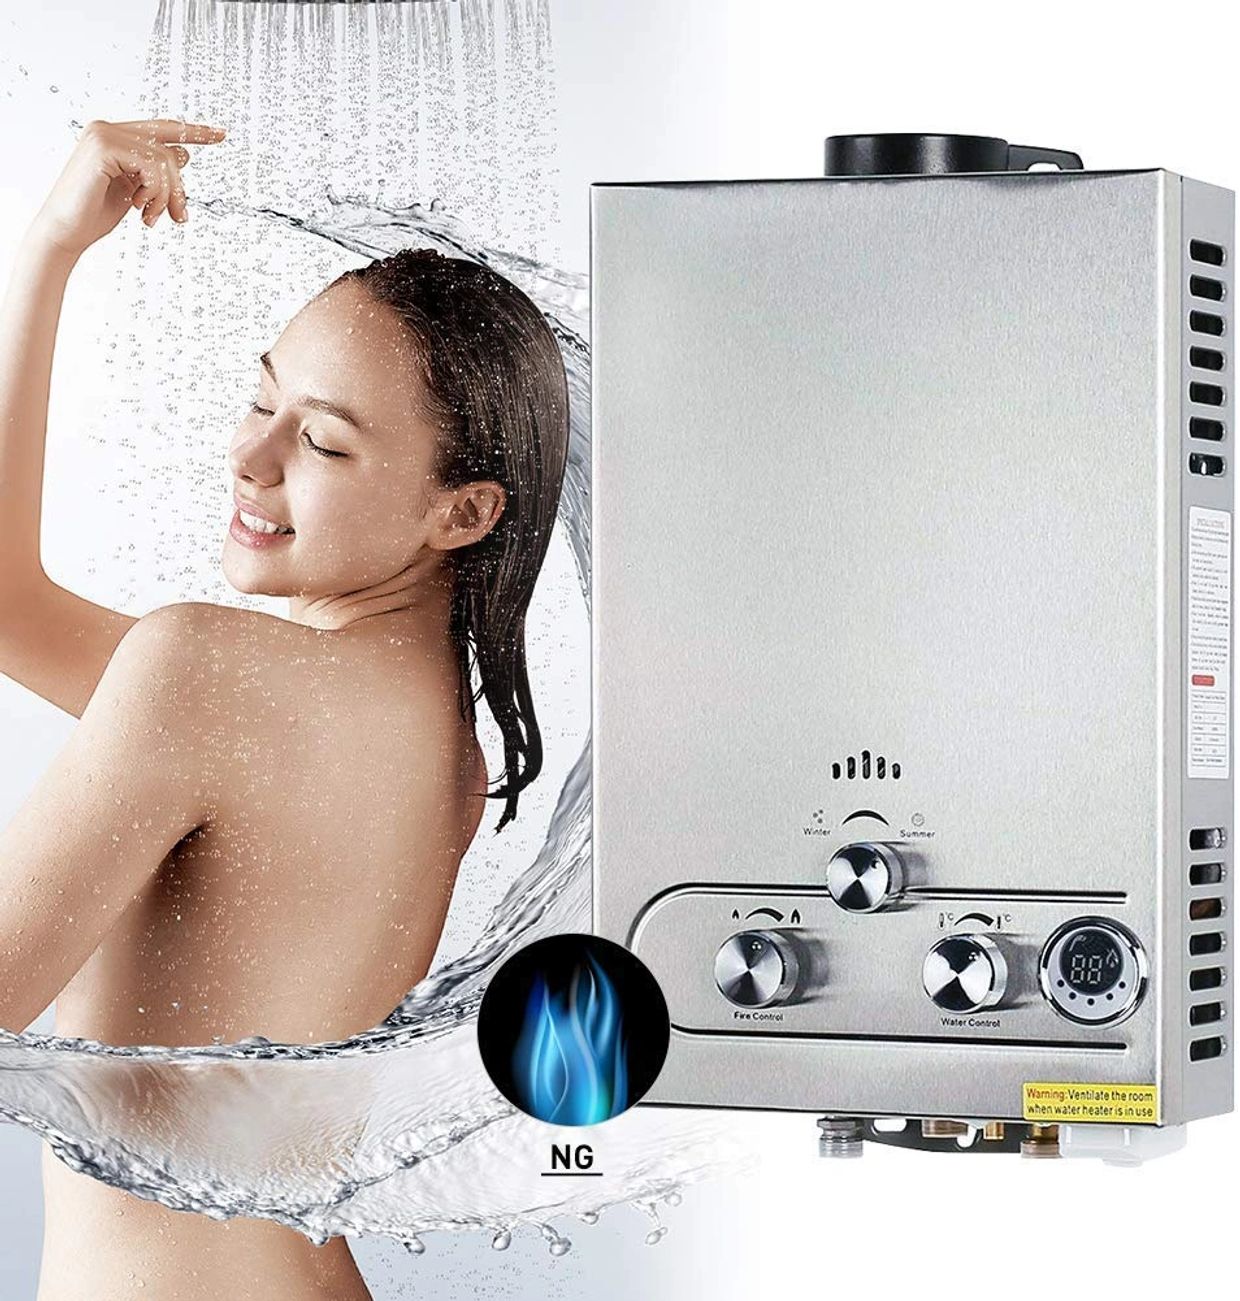 Women take shower with hot water